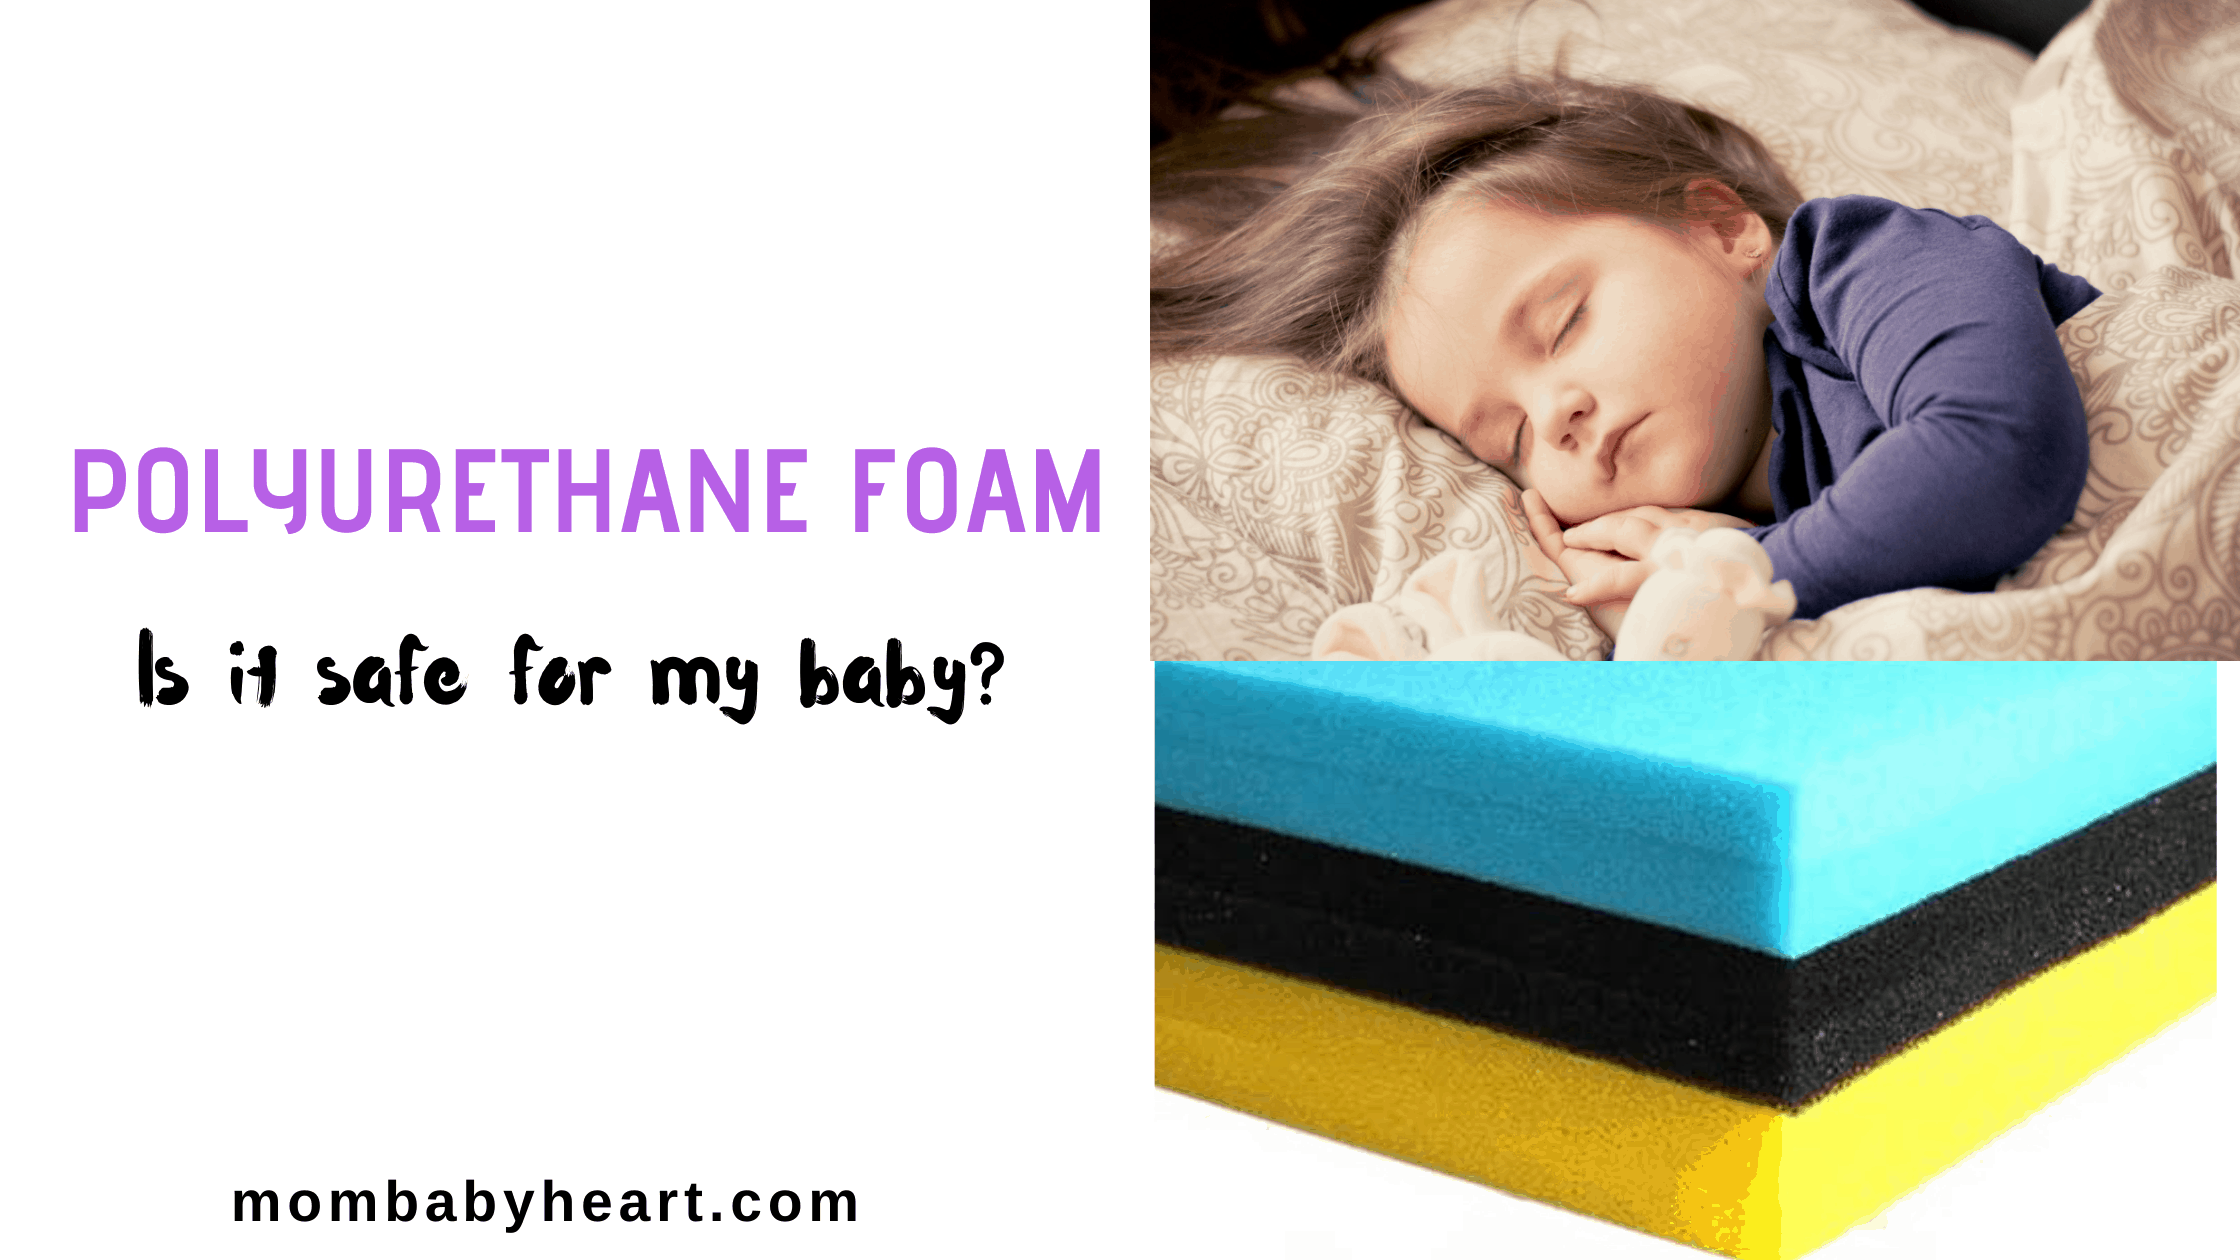 Is Polyurethane foam safe for my baby?